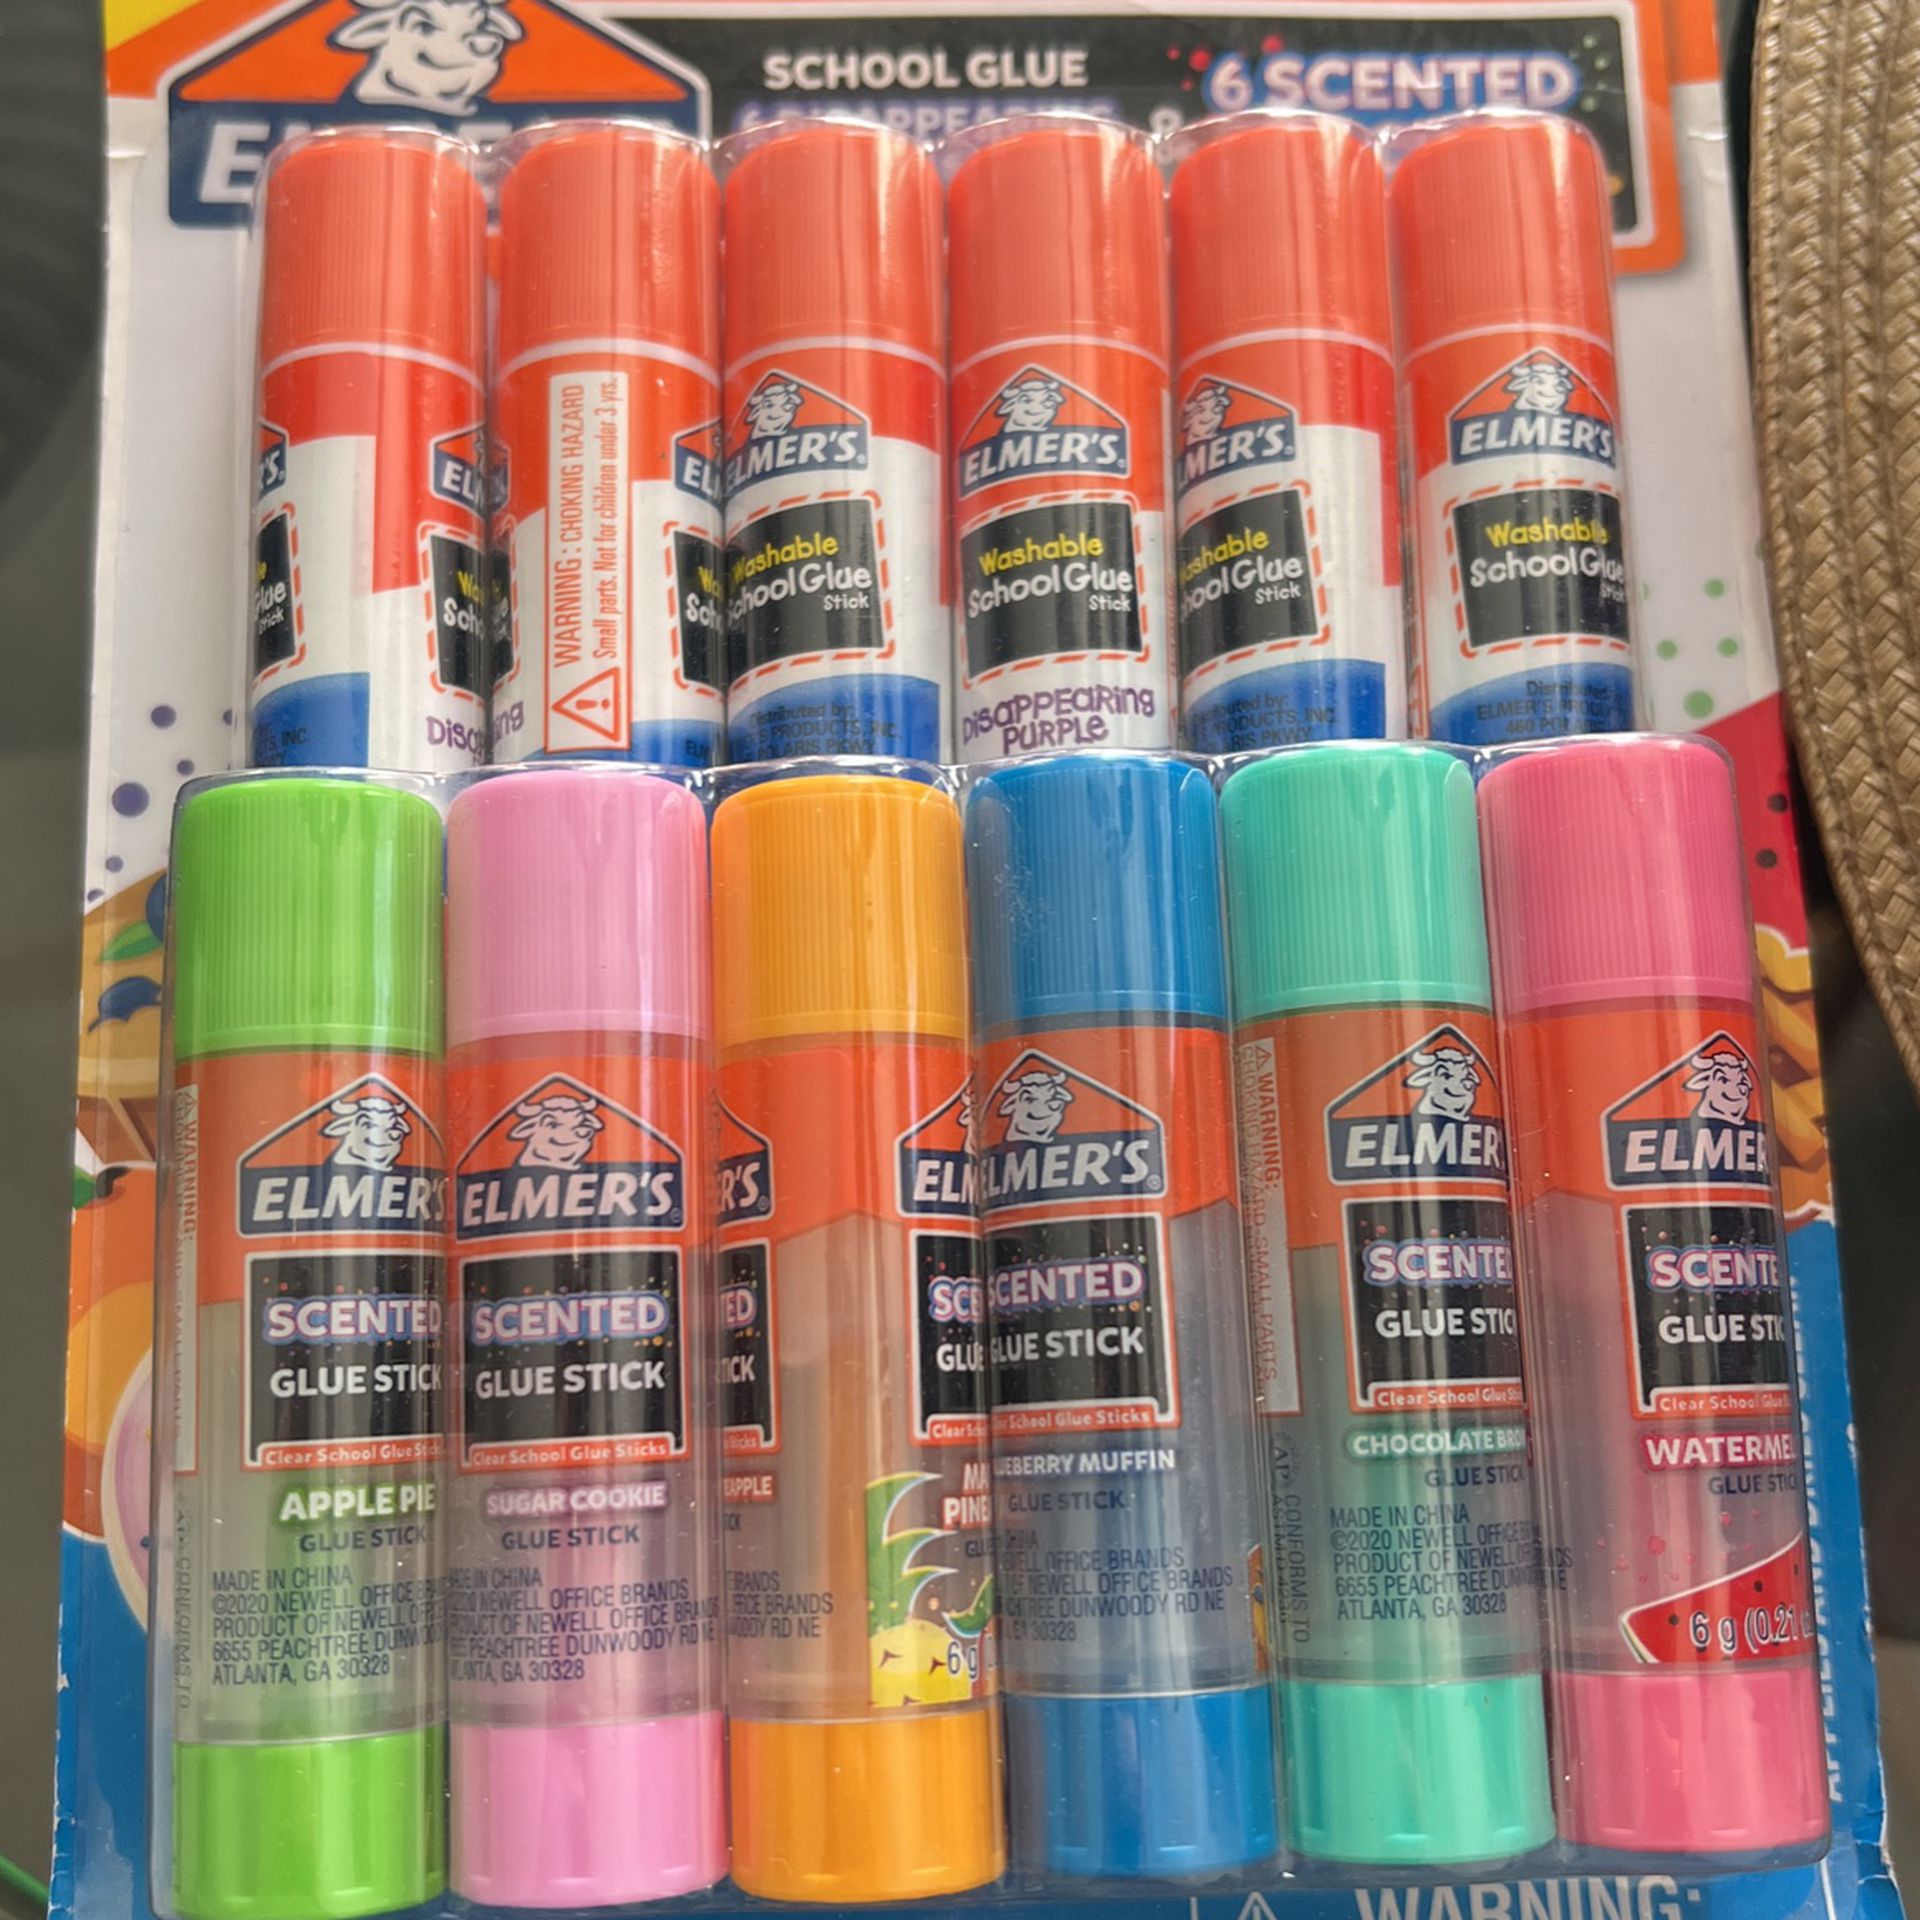 Elmers Scent Stick, 4 New Packs For 18 Dls!!! for Sale in Jonesboro, GA -  OfferUp